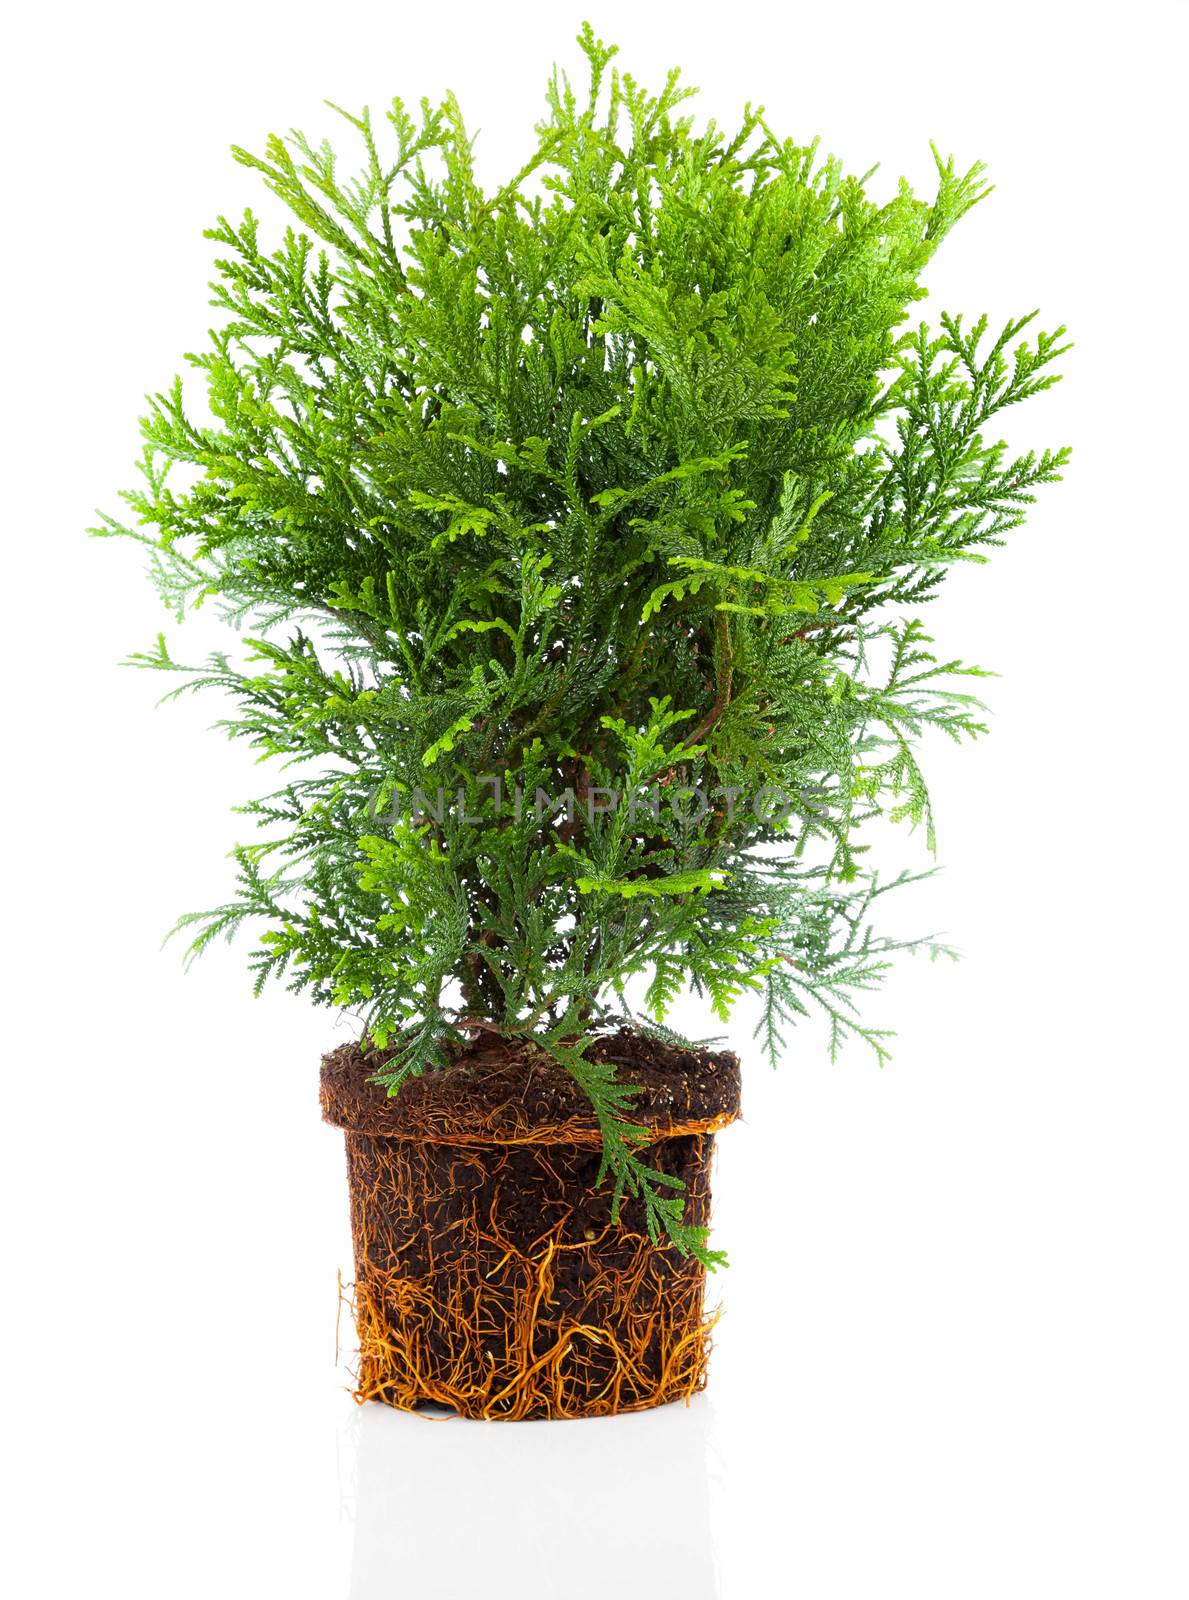 Thujopsis is a conifer in the cypress family Cupressaceae, with roots isolated on white background